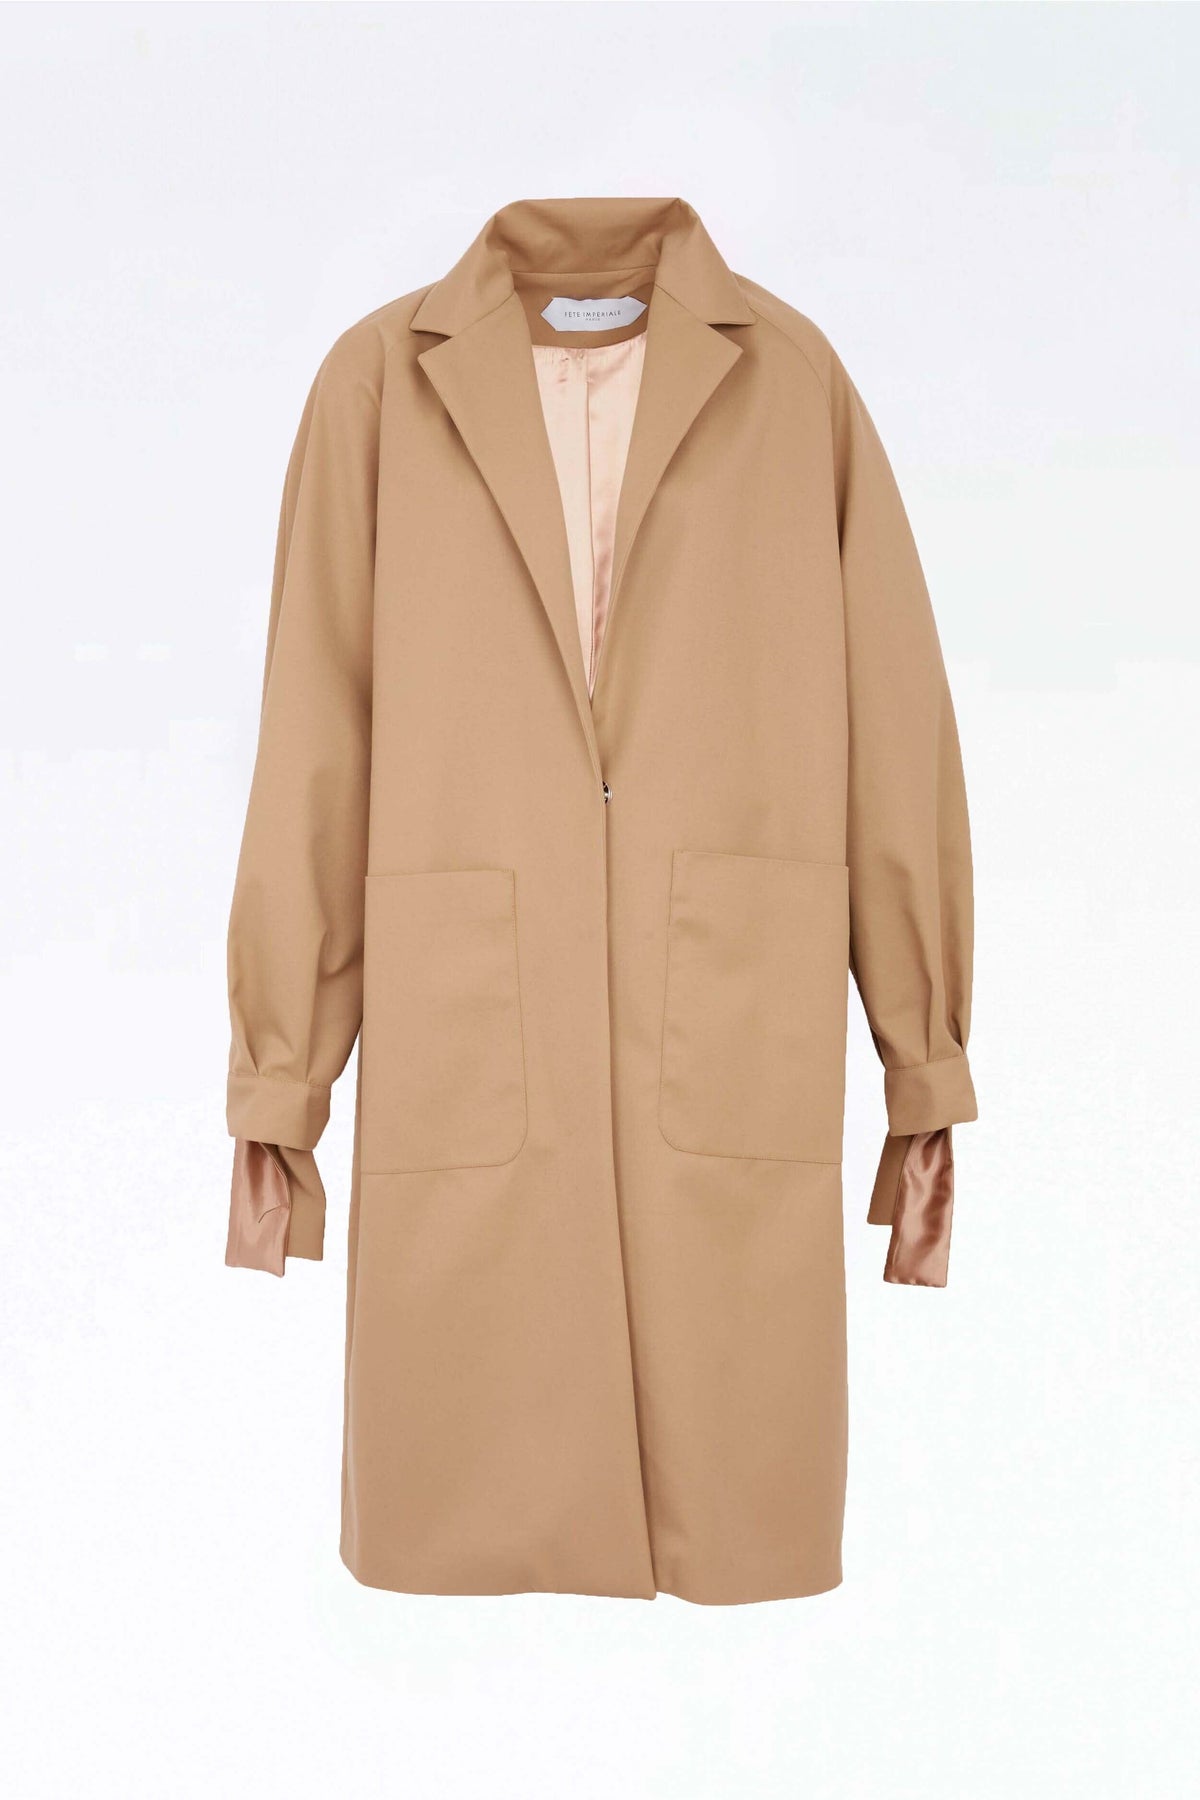 RINGO - Oversized trenchcoat with knotted cuffs in beige gabardine Trenchcoat Fête Impériale